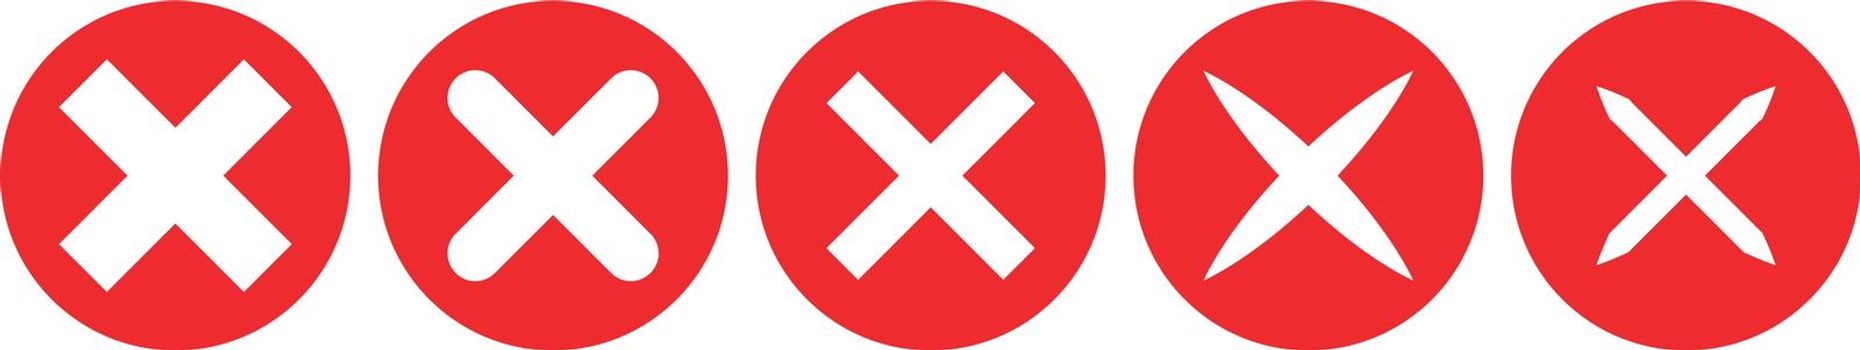 Cross mark icon set showing fraud or mistakes. Red vector.